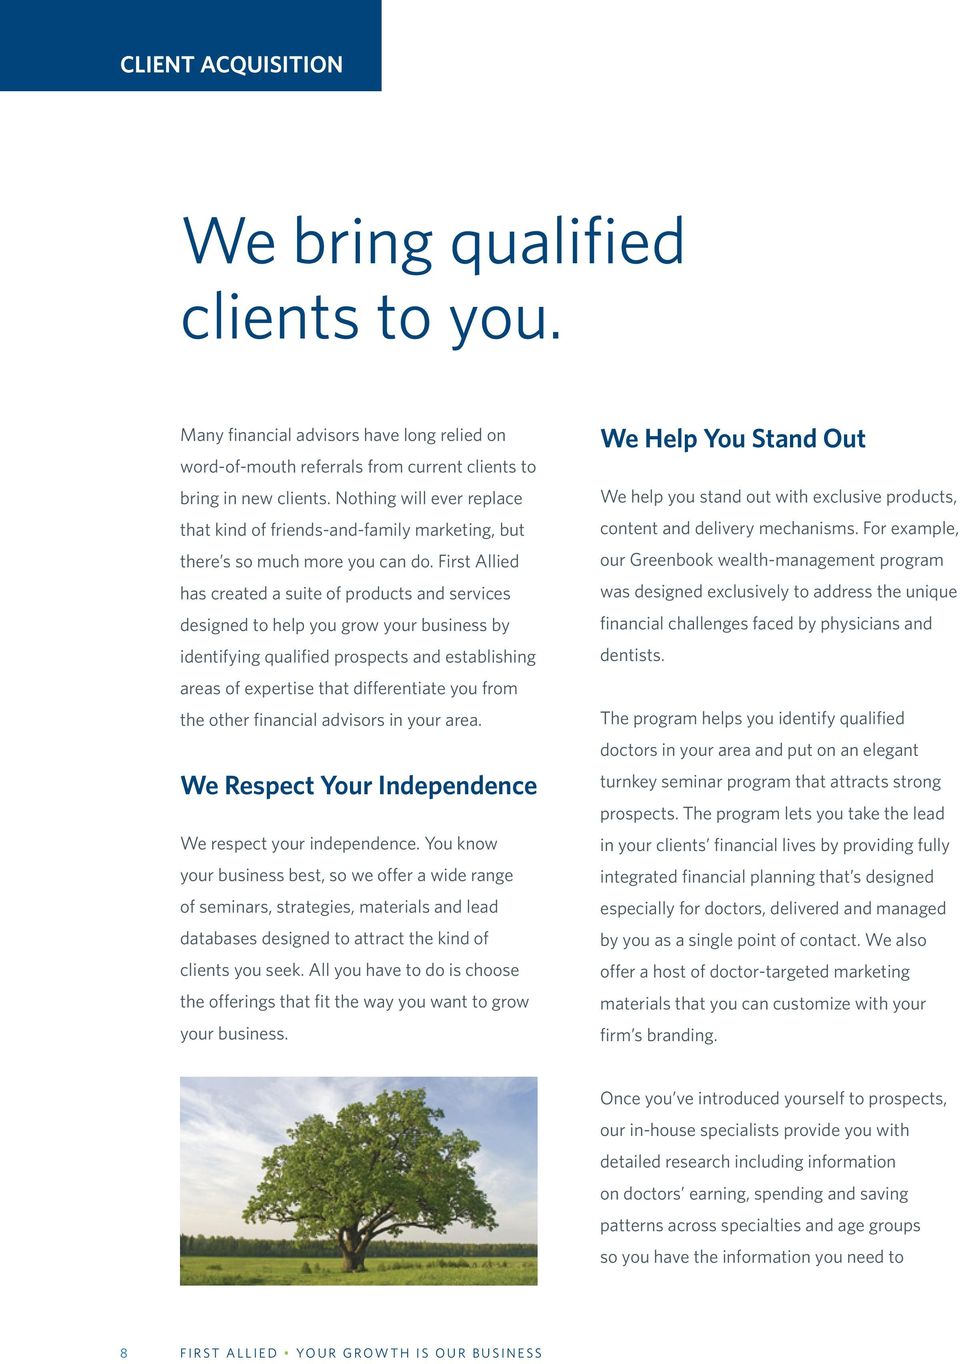 First Allied has created a suite of products and services designed to help you grow your business by identifying qualified prospects and establishing areas of expertise that differentiate you from